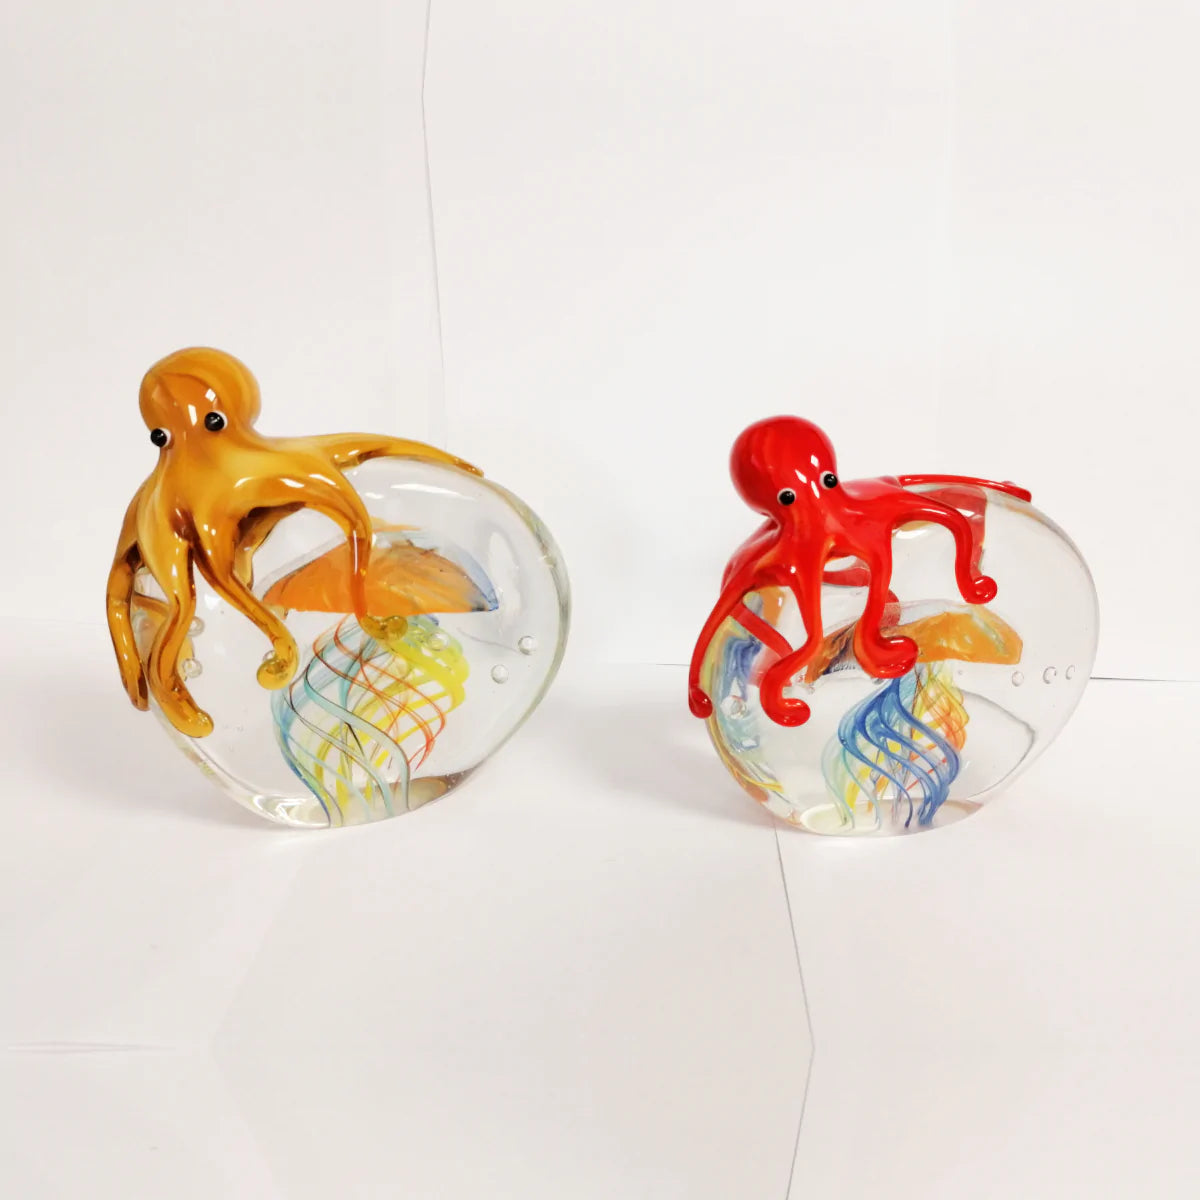 Red octopus and jellyfish paperweight